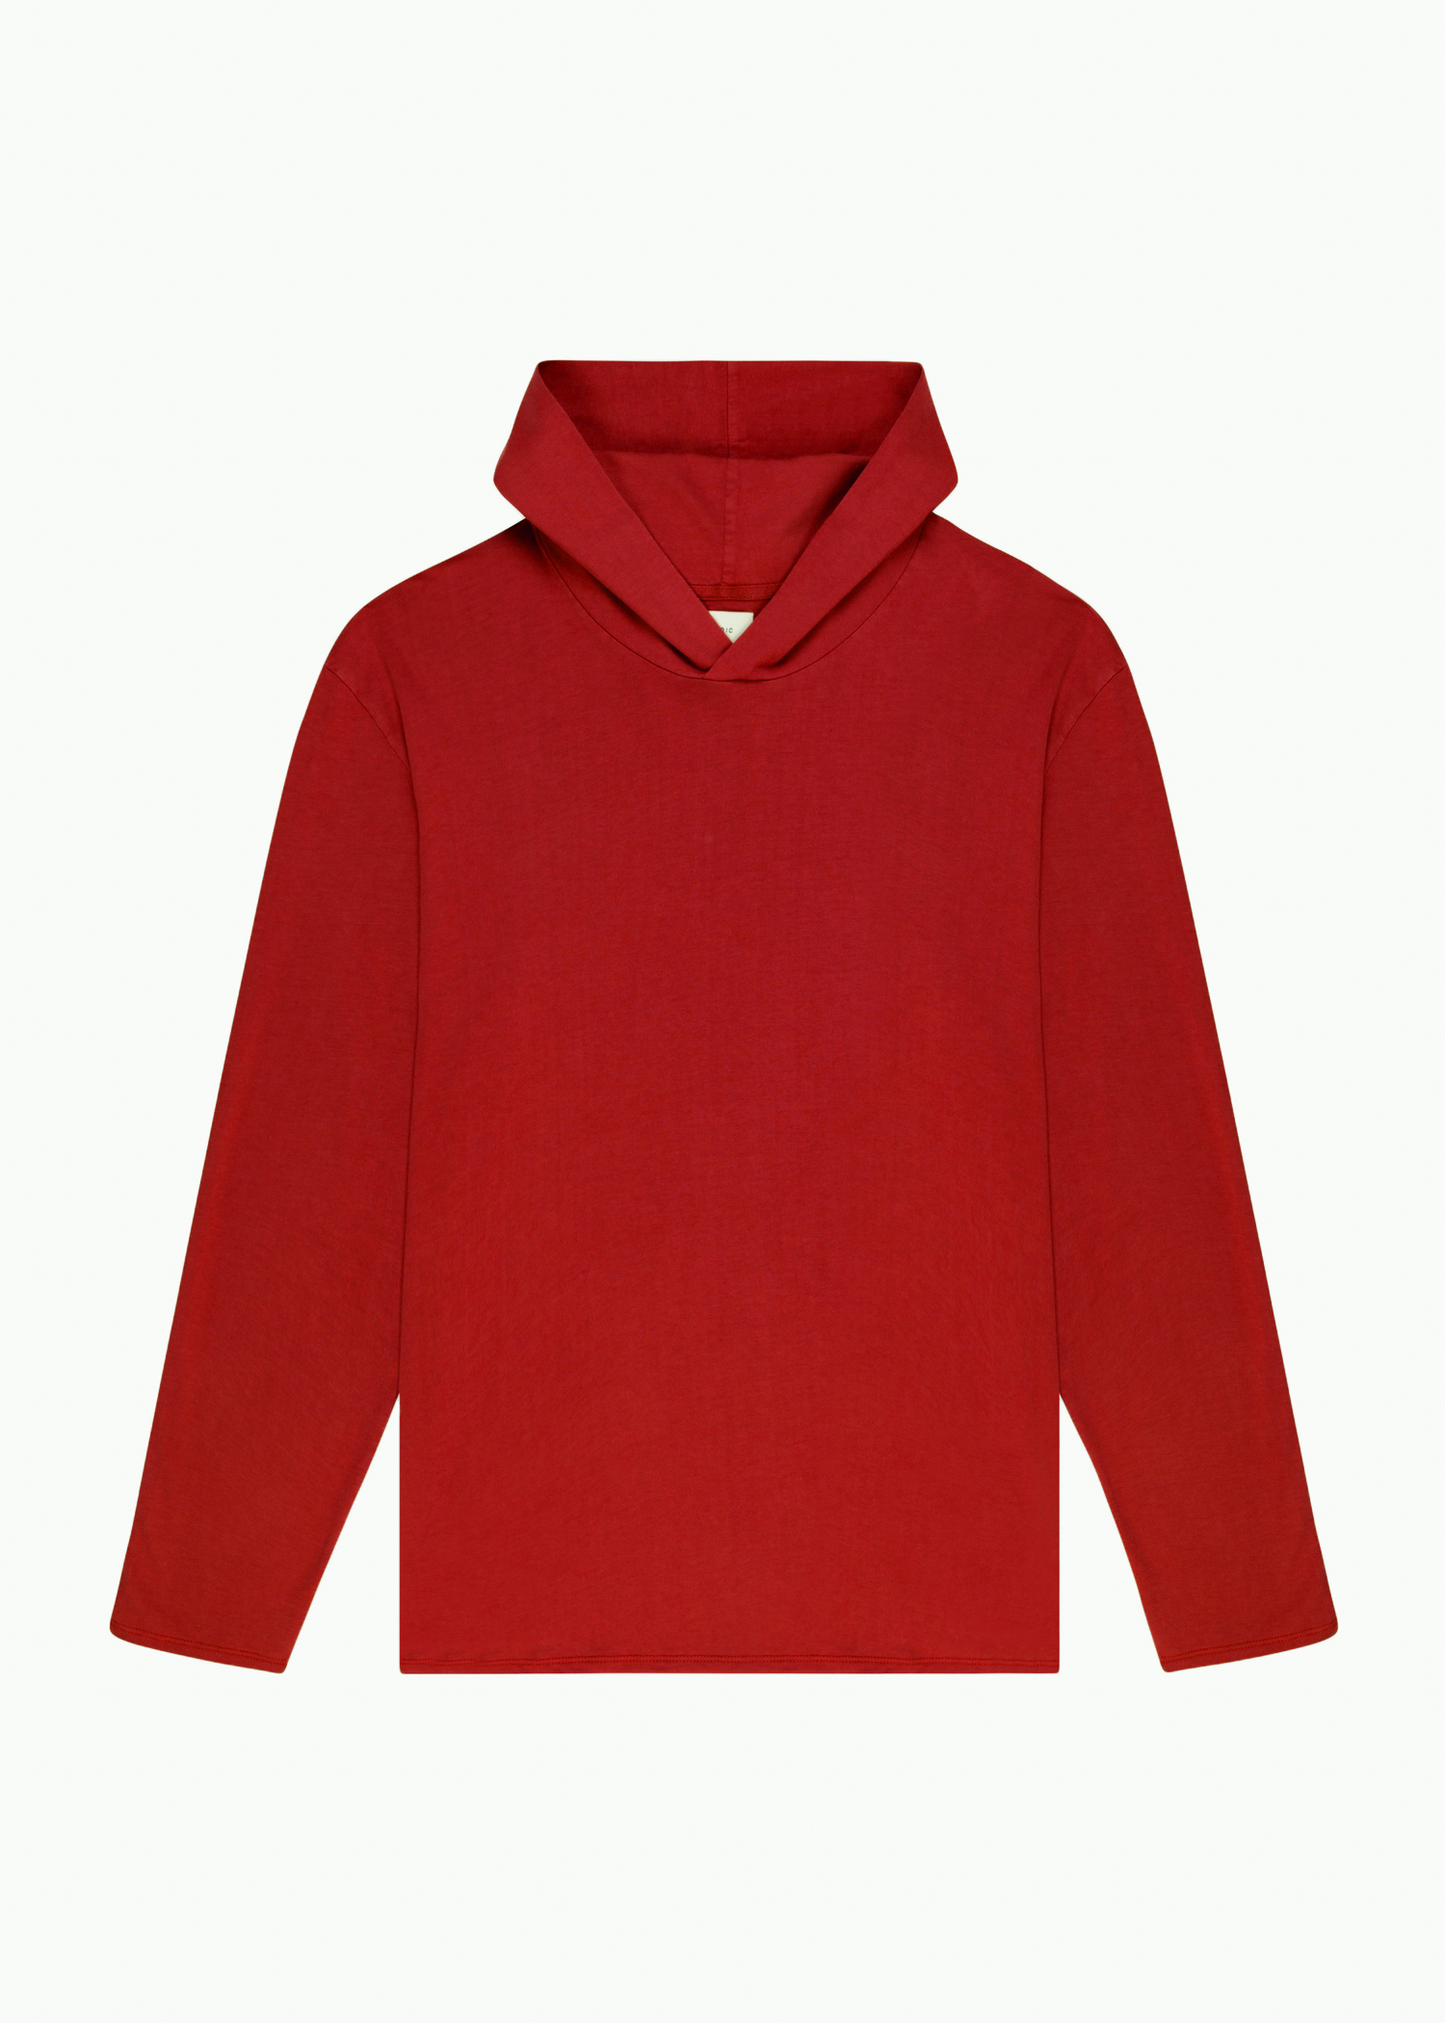 Basis LS Pullover Hoody Red